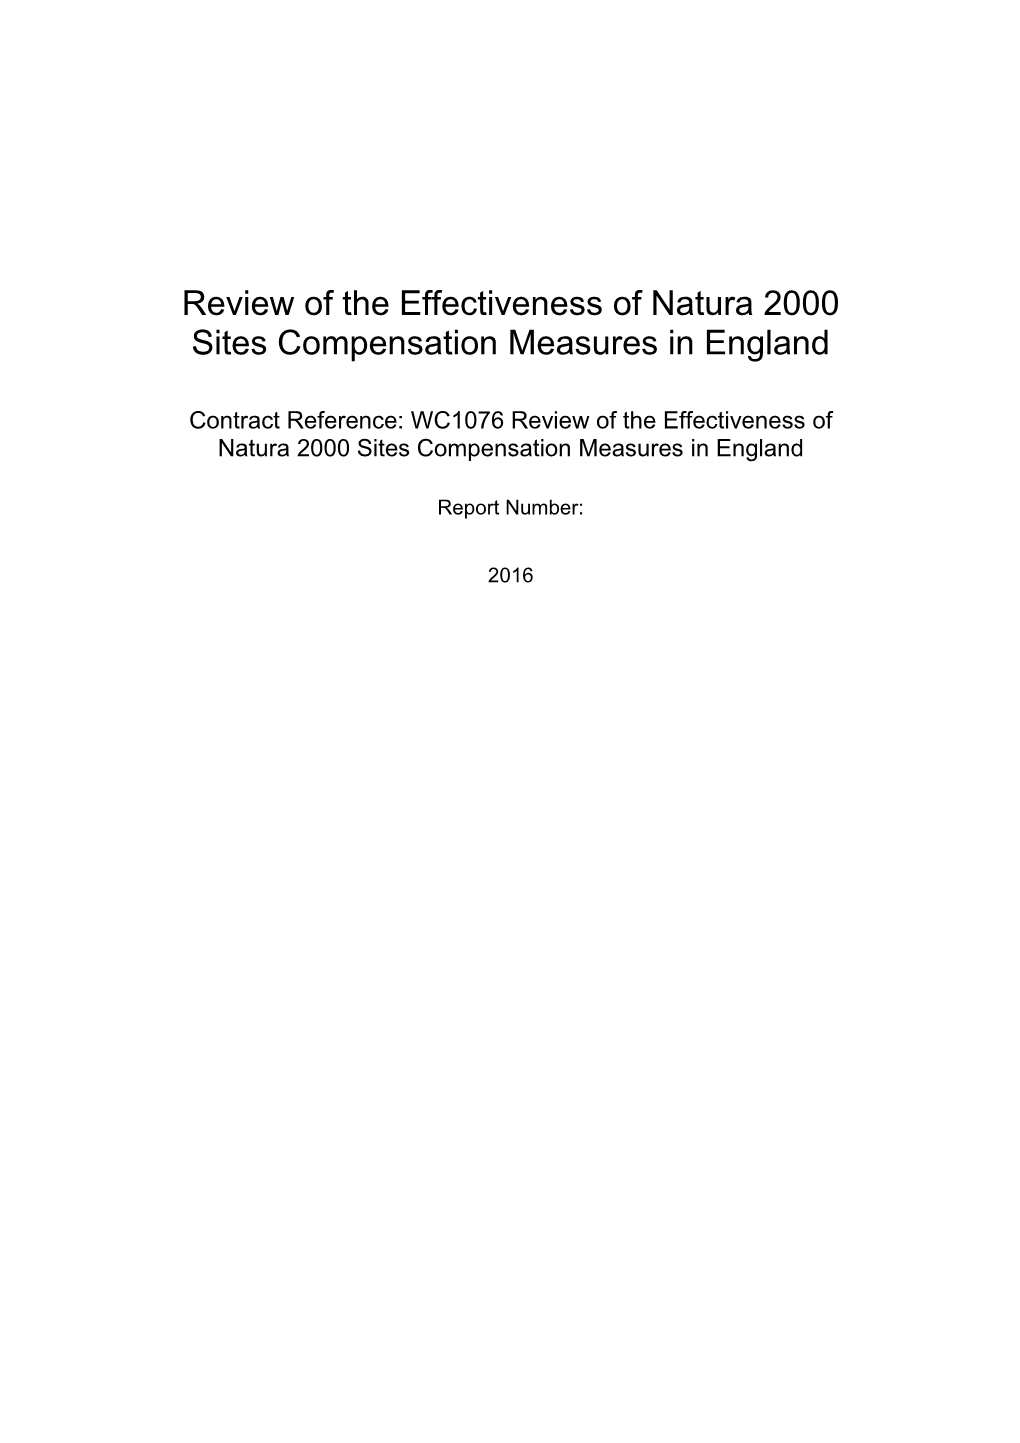 Review of the Effectiveness of Natura 2000 Sites Compensation Measures in England